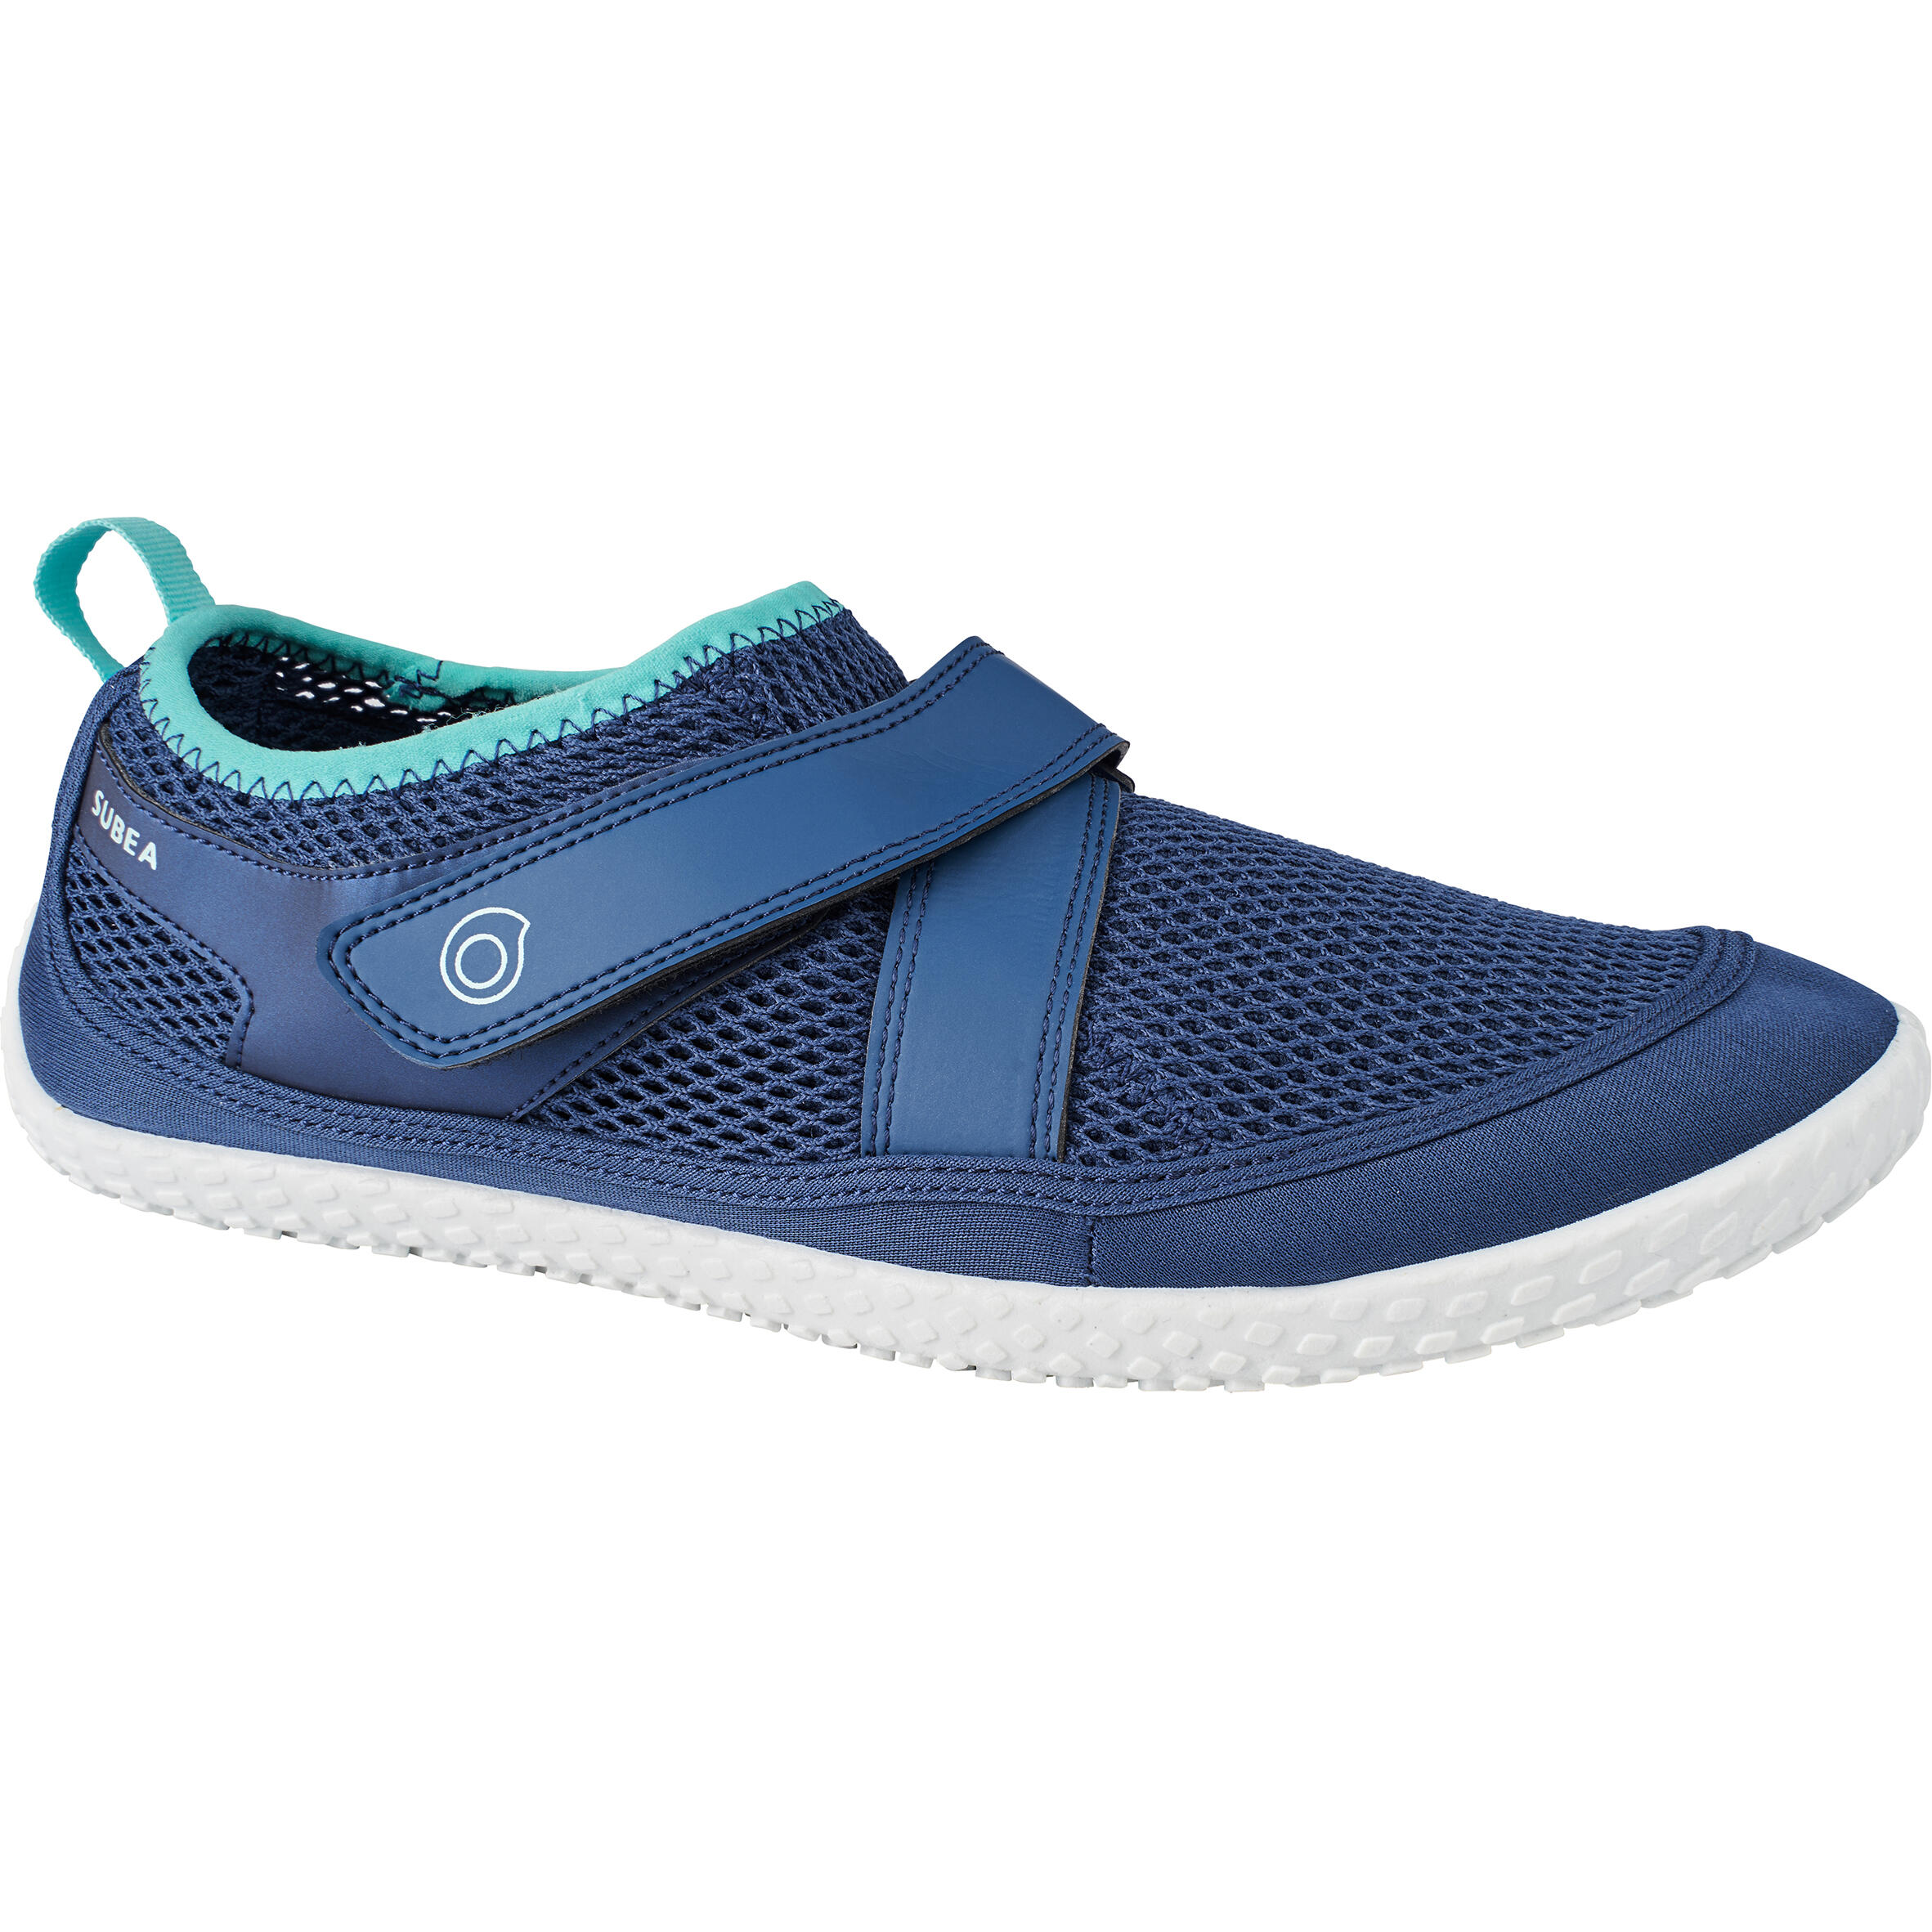 Two Bare Feet Aqua Shoes Rockpool Cliff Jump Wet Shoes Adults and Childrens Neoprene Water Shoes 